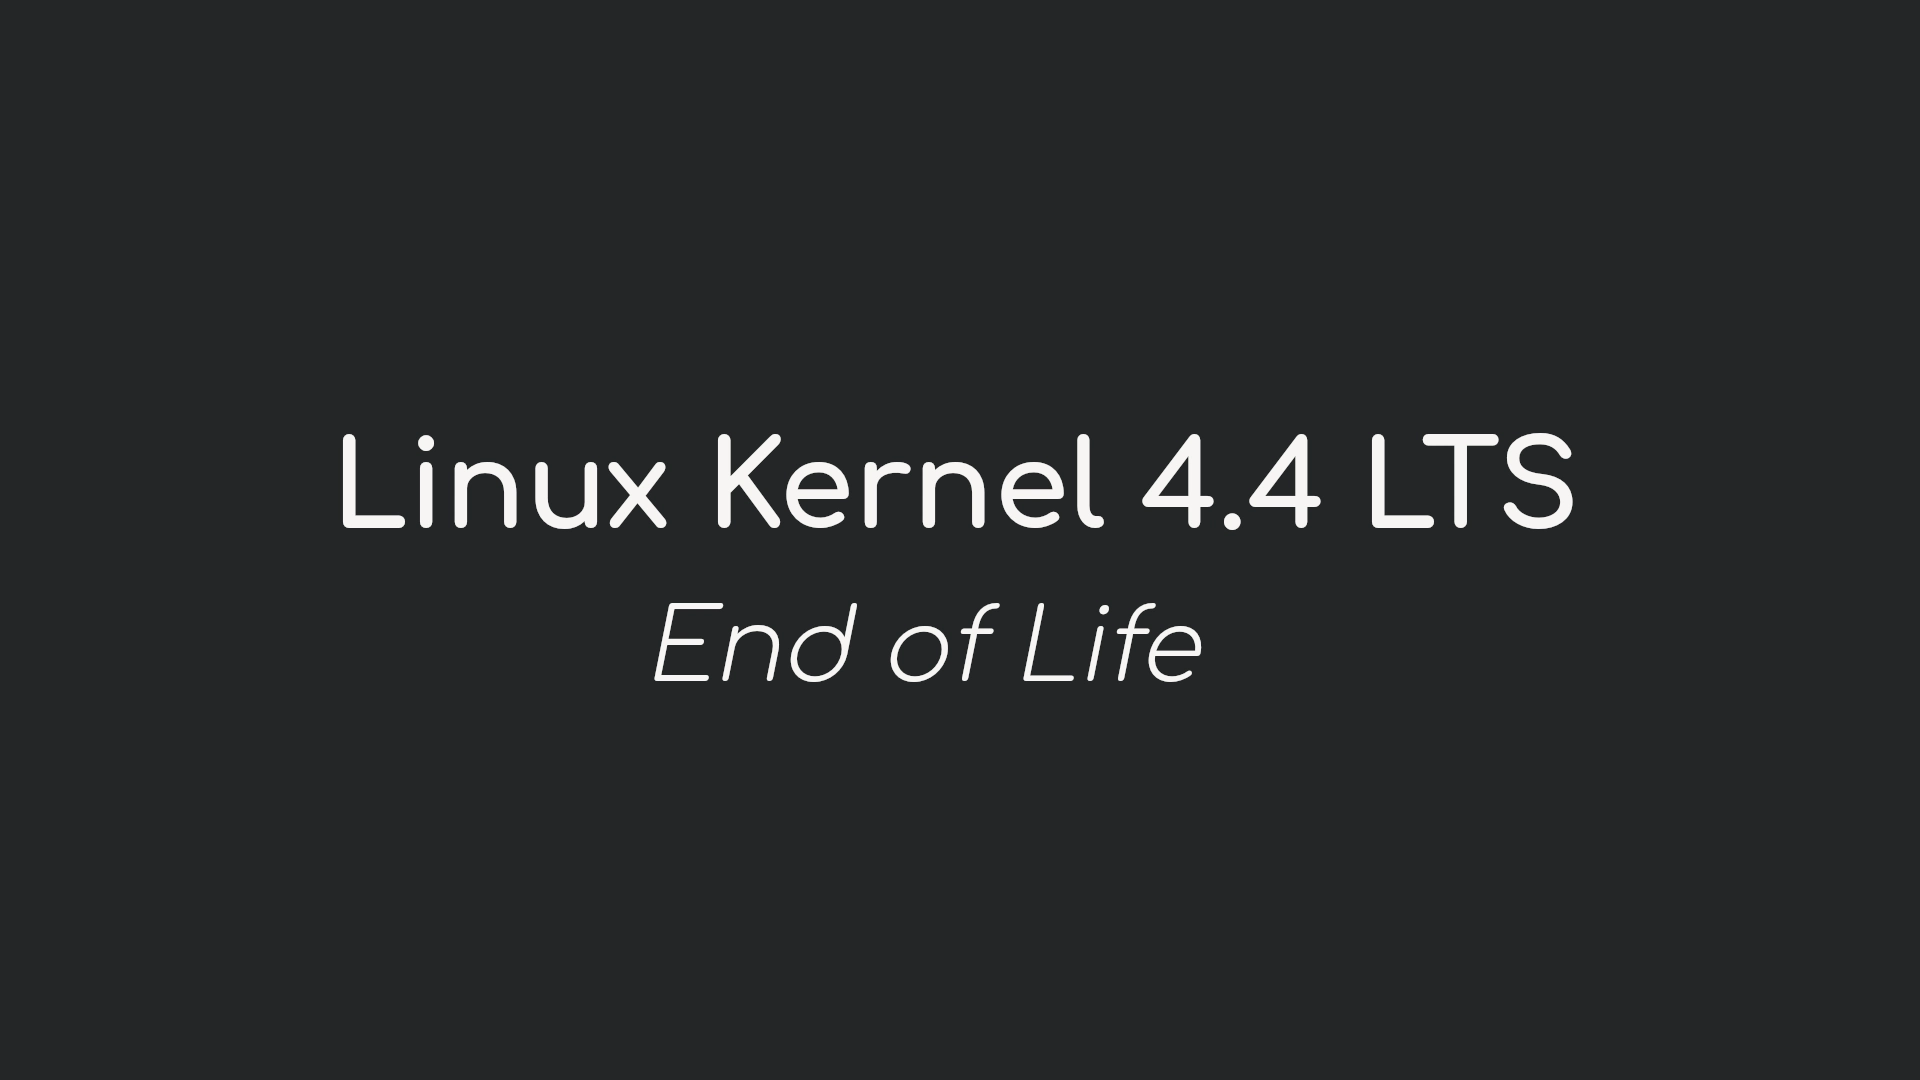 Linux Kernel 4.4 LTS Reaches End of Life After Six Years of Support